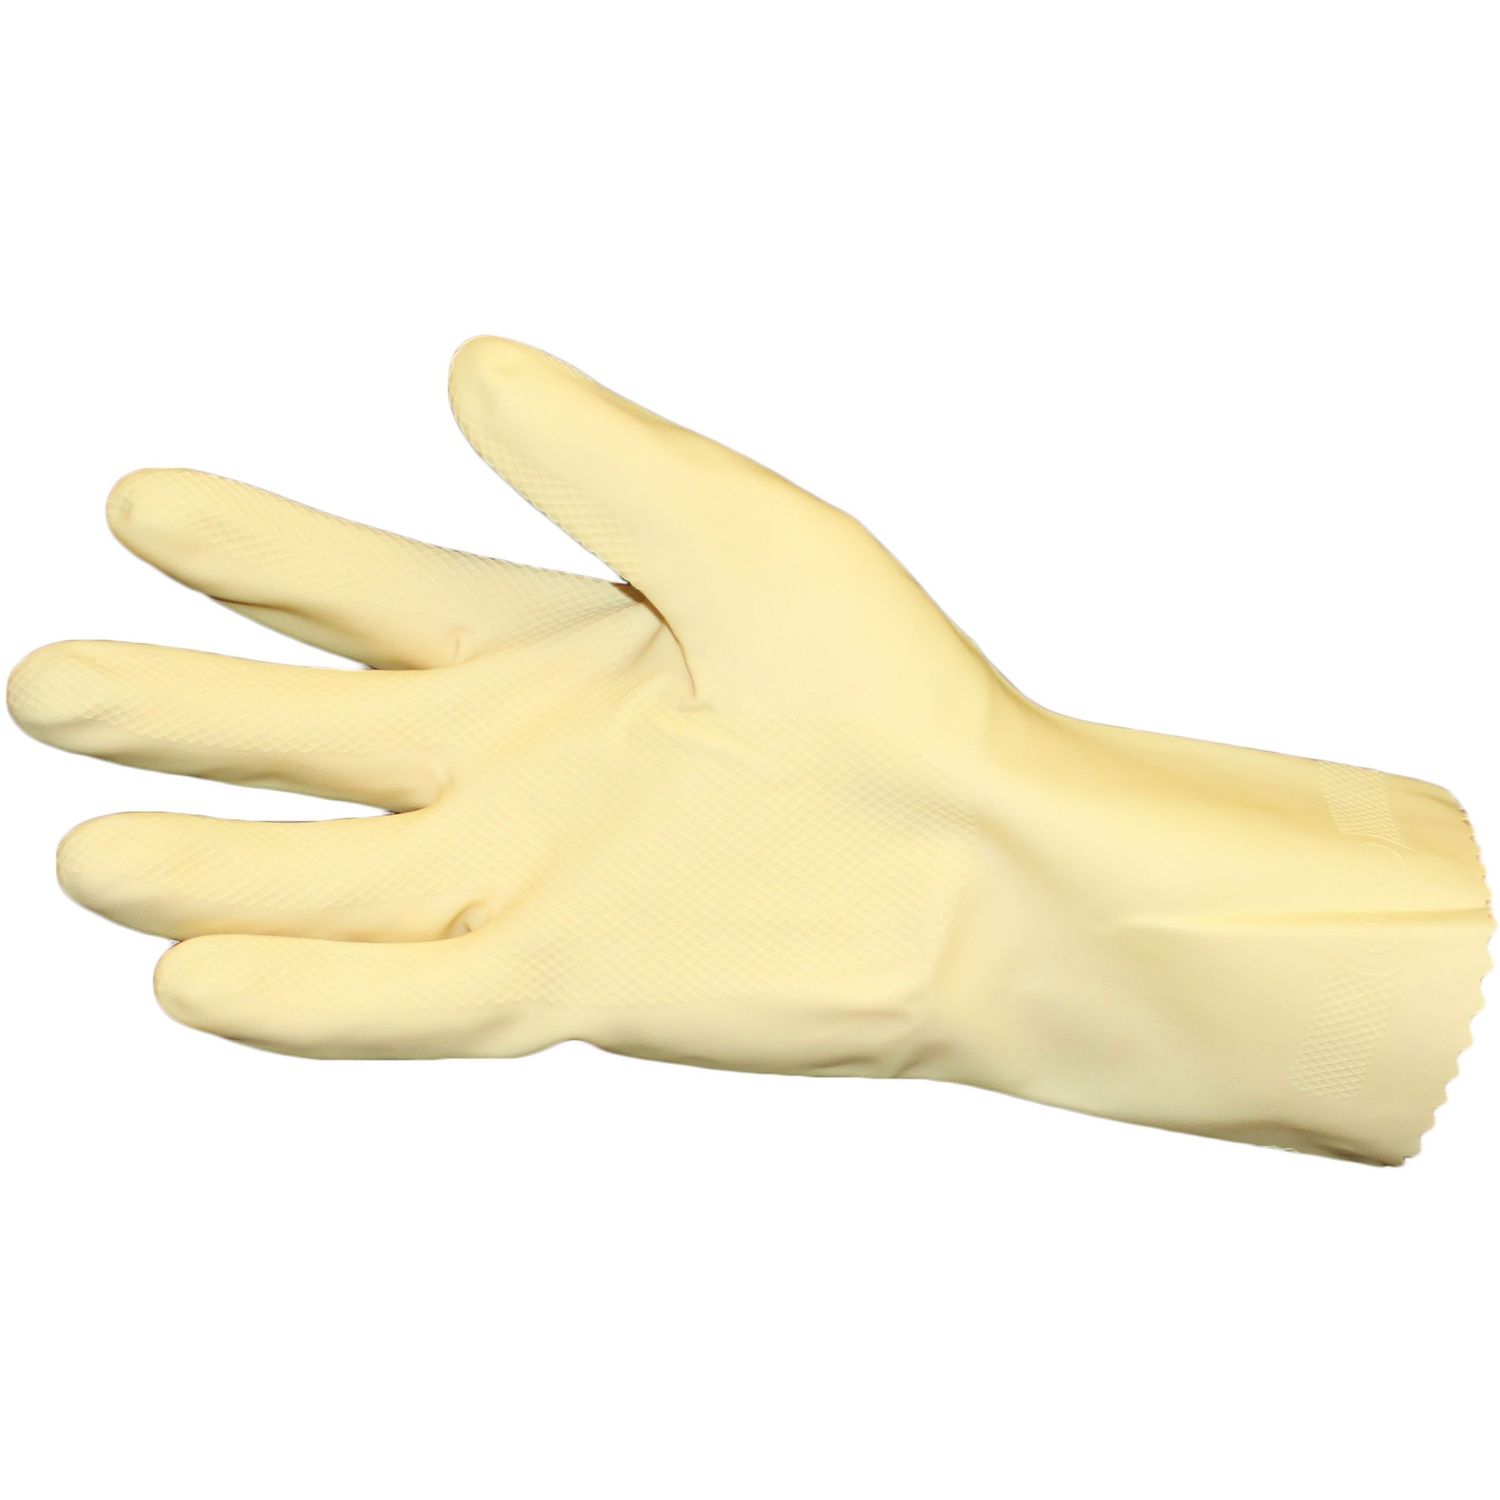 Unlined Latex Reusable Glove Chemical Protection, Large Size, Latex, Natural